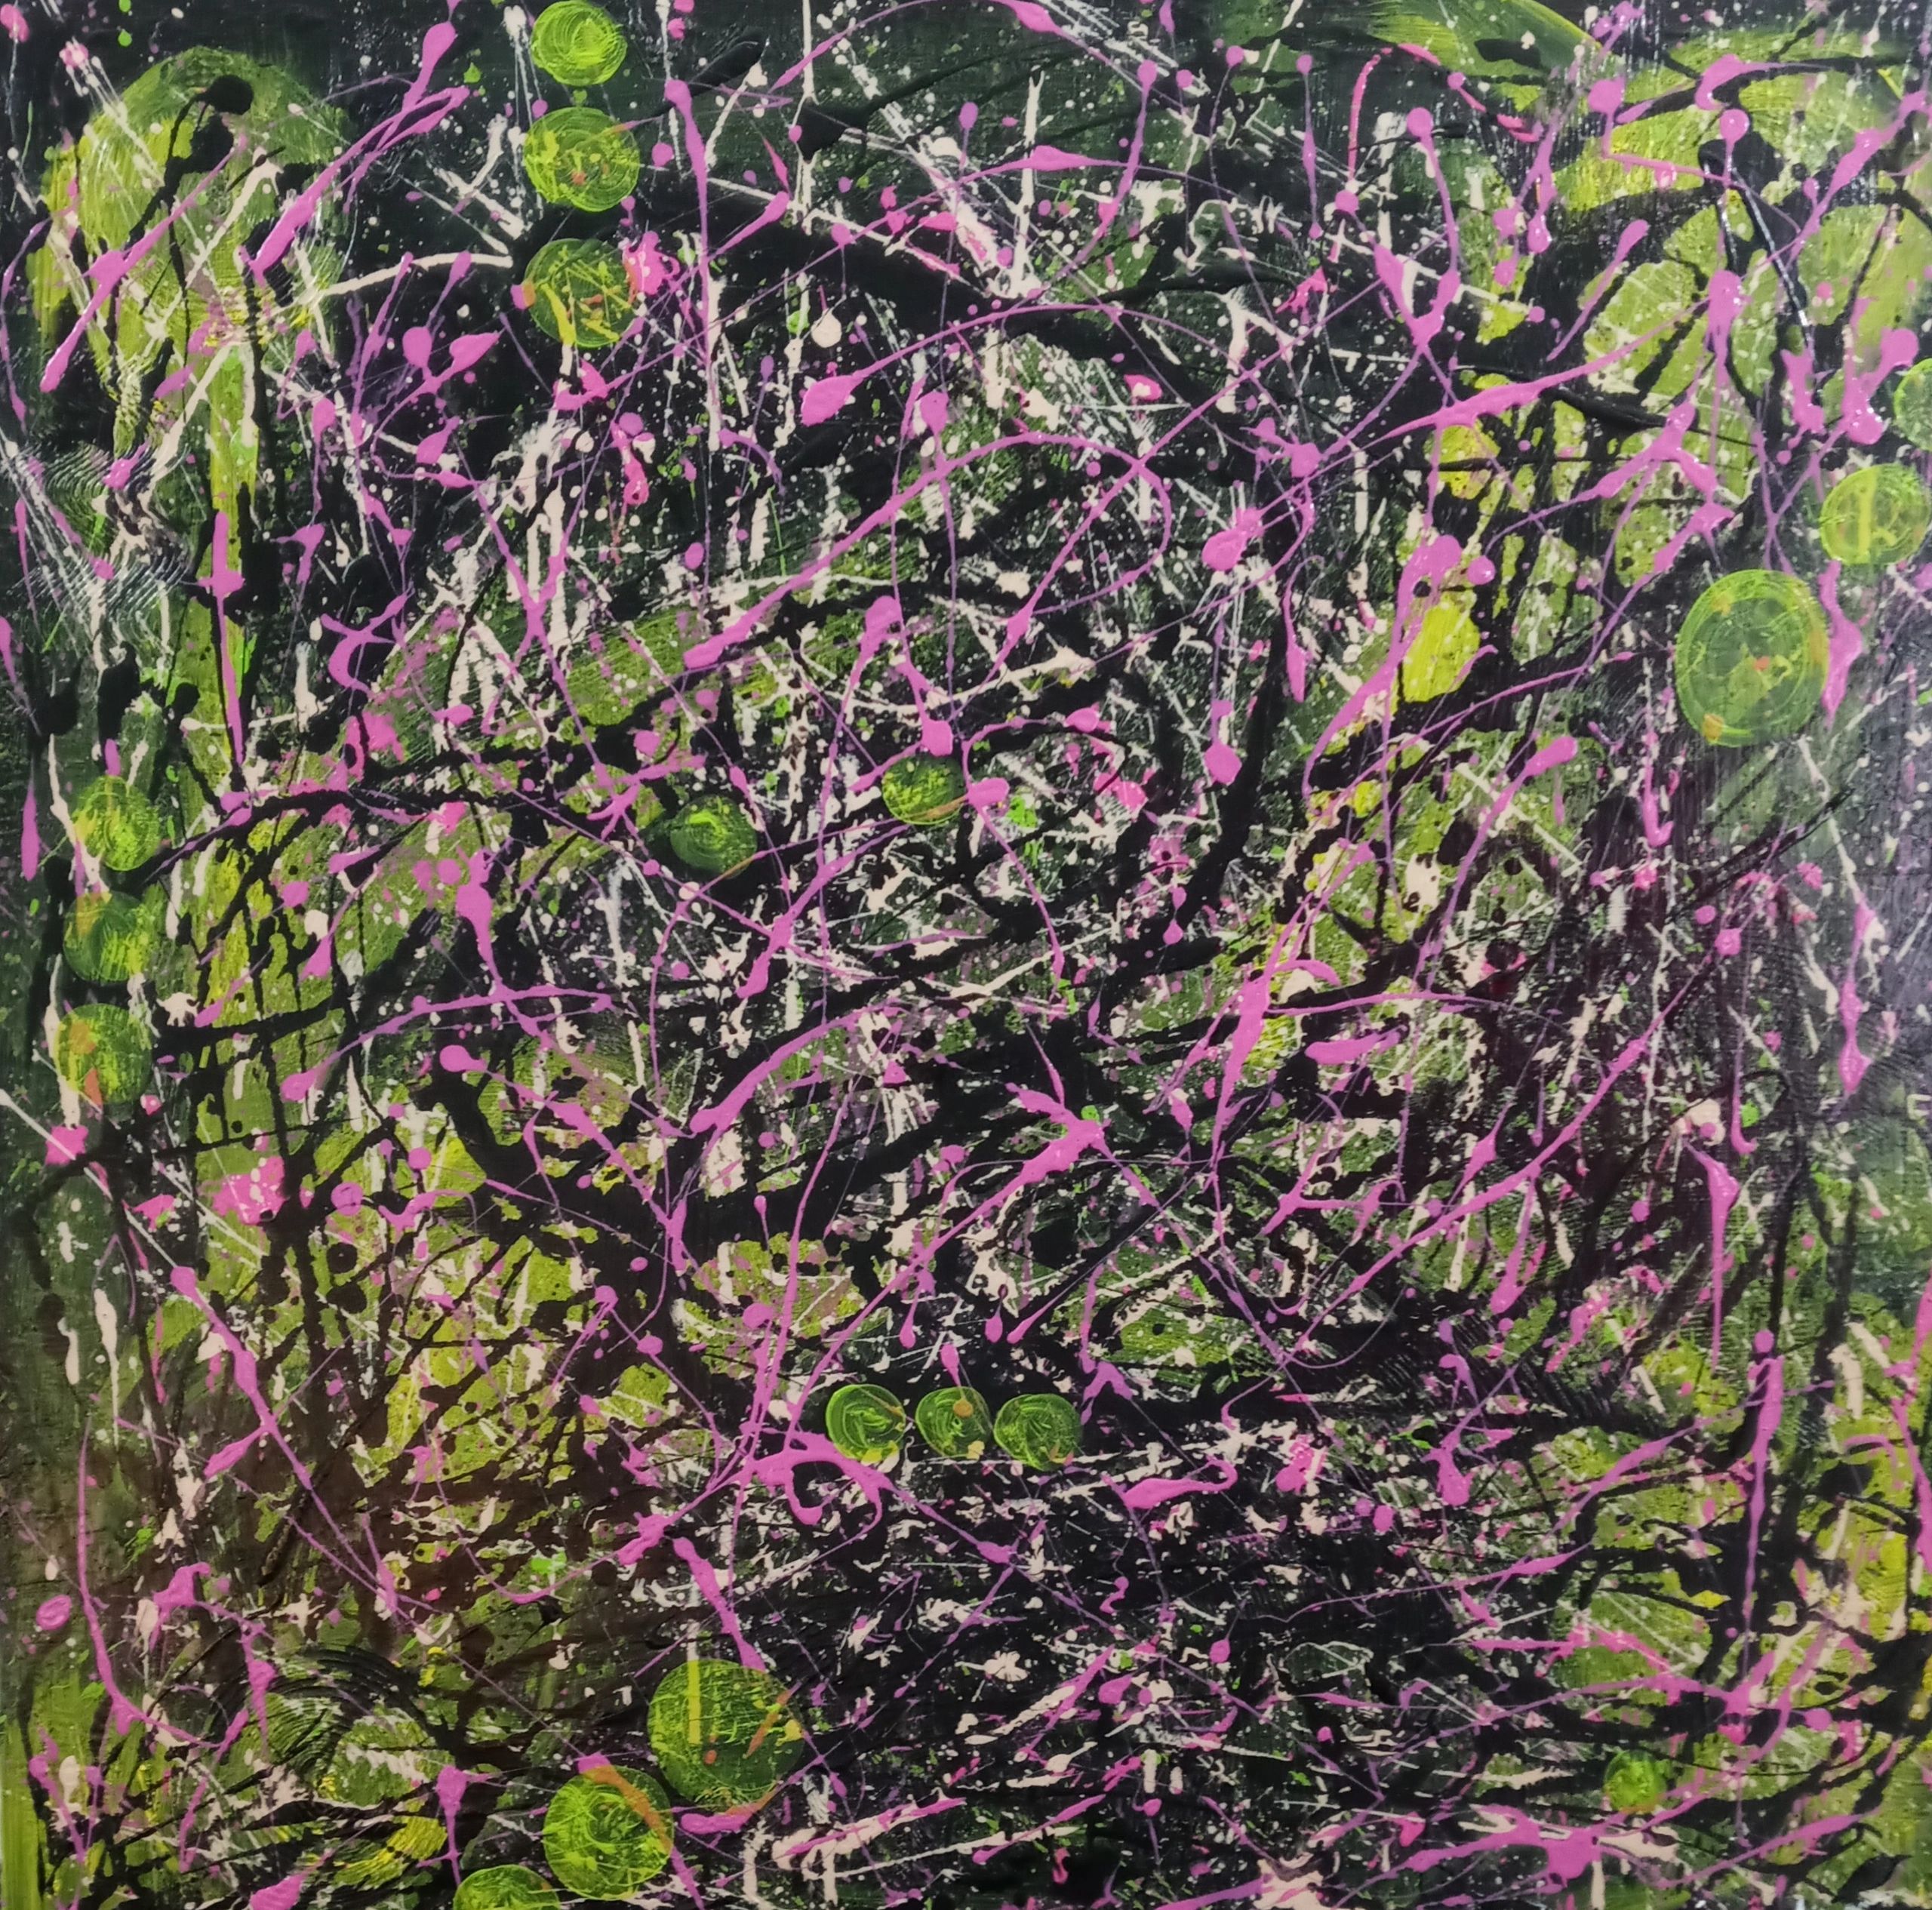 Alone In The Garden.  See the vines, flower buds, and wind in this abstract painting.